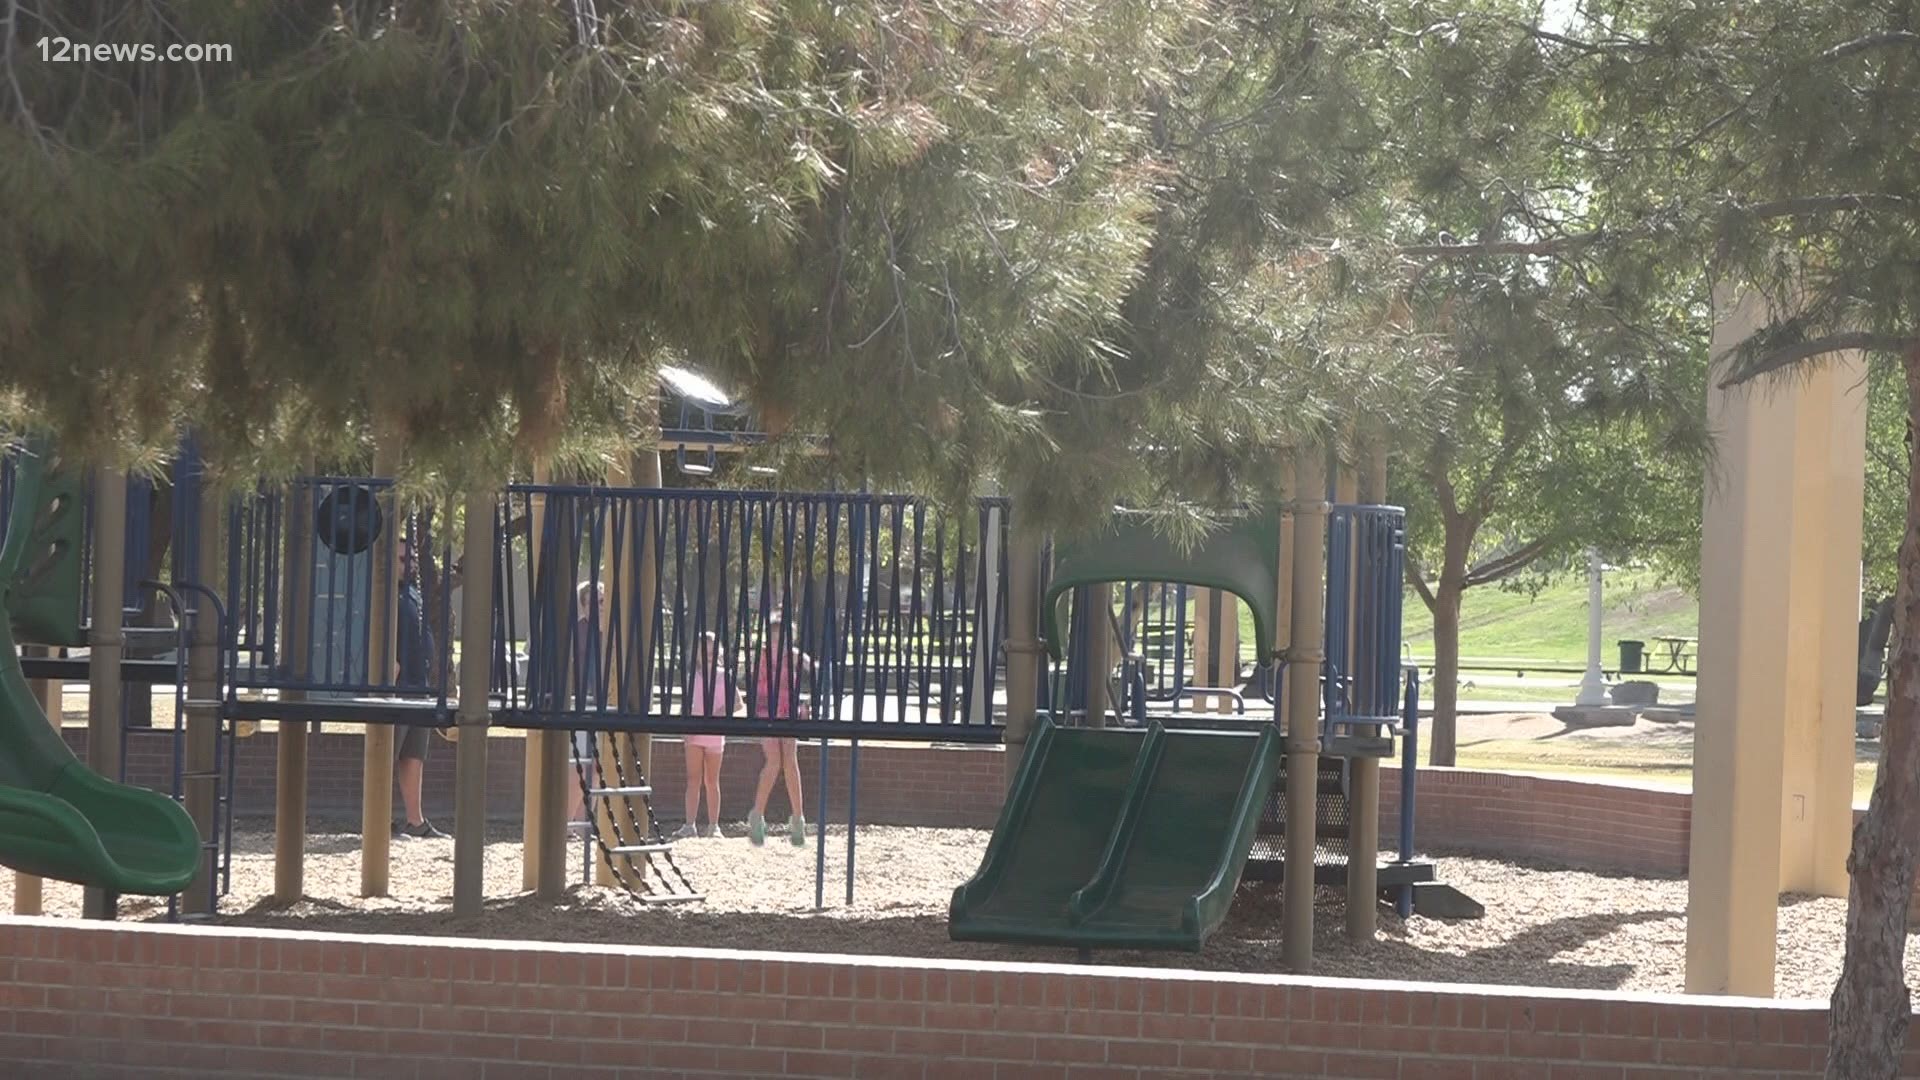 Phoenix parks' parking lots will be closed Easter weekend. The city is also prohibiting the use of parks' grills. The restrictions are to promote COVID safety.